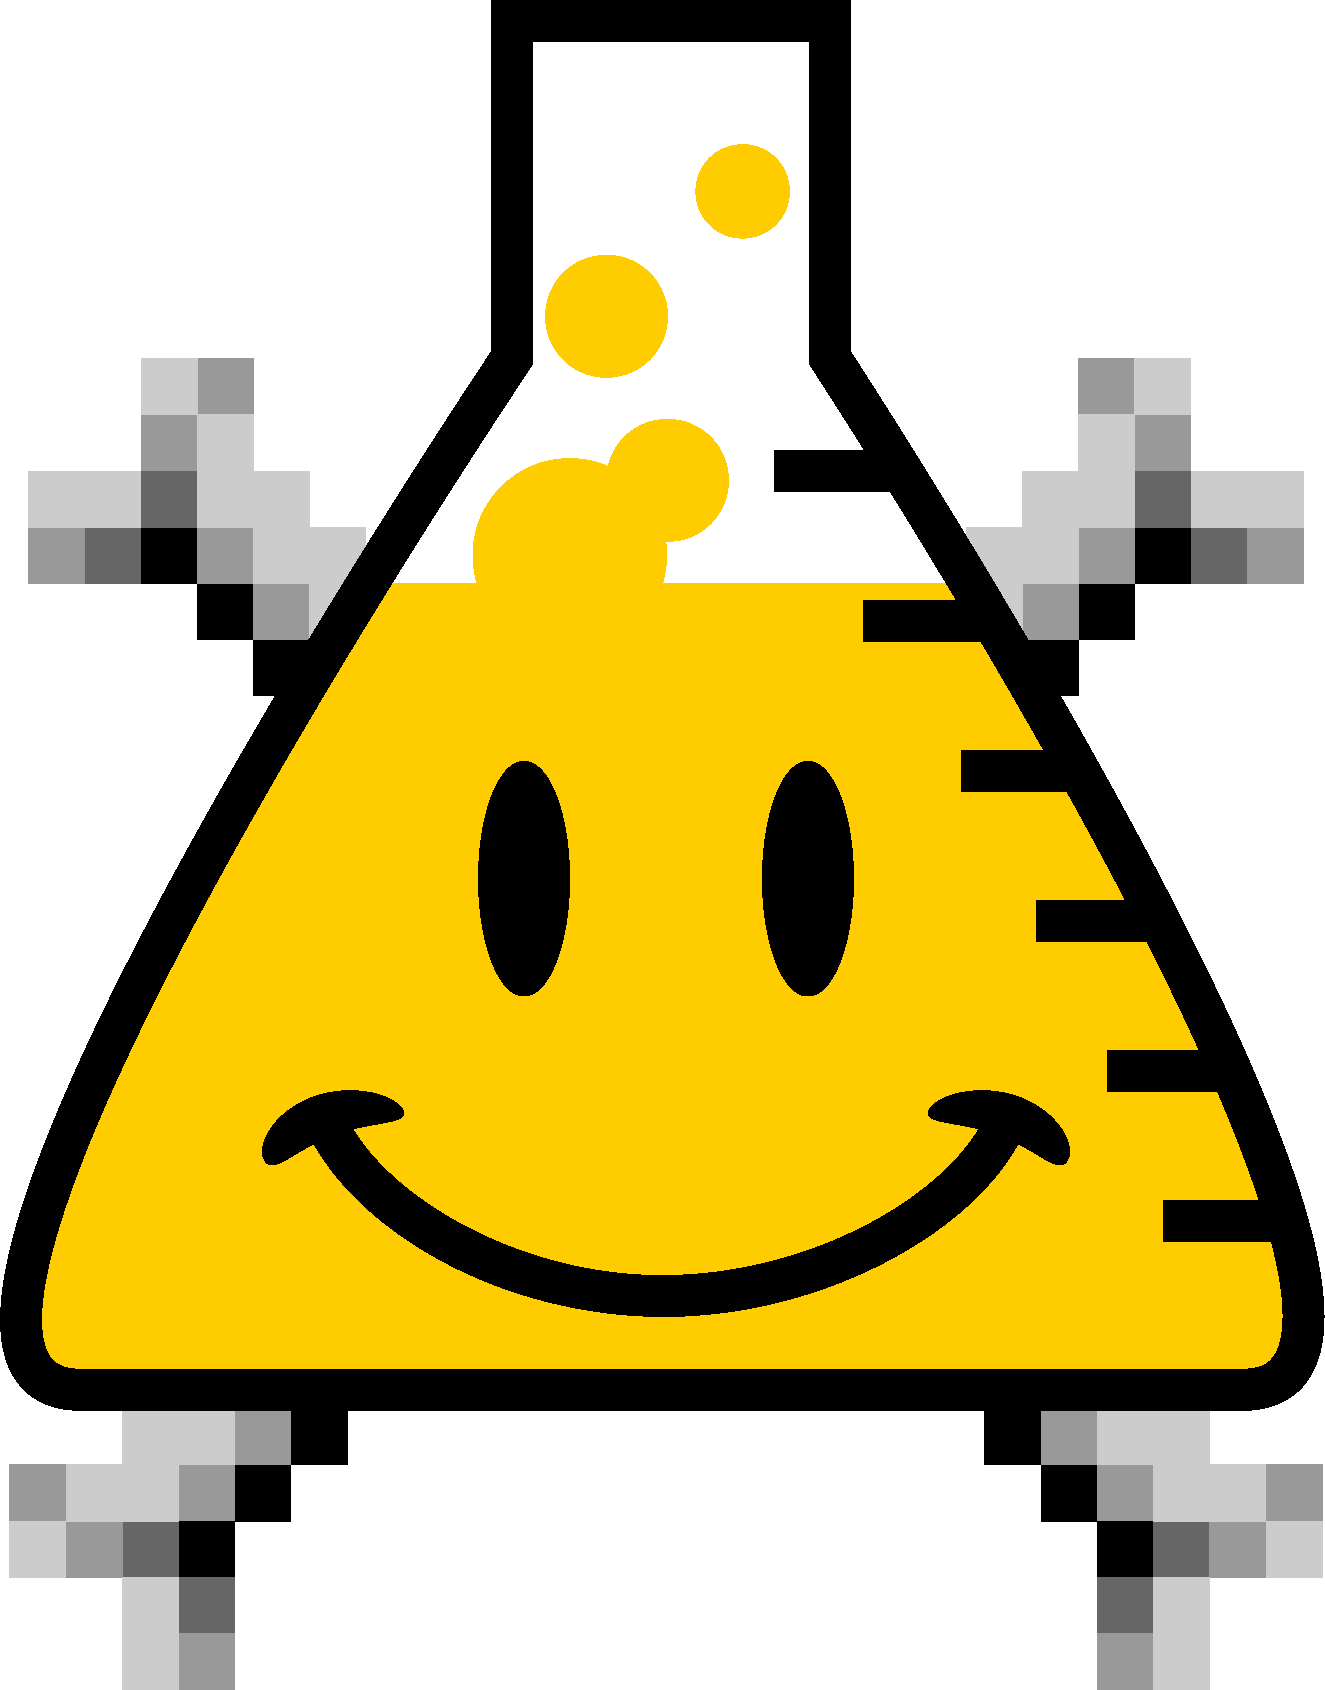 a bubbling beaker with a smiling face and crossedbones behind it